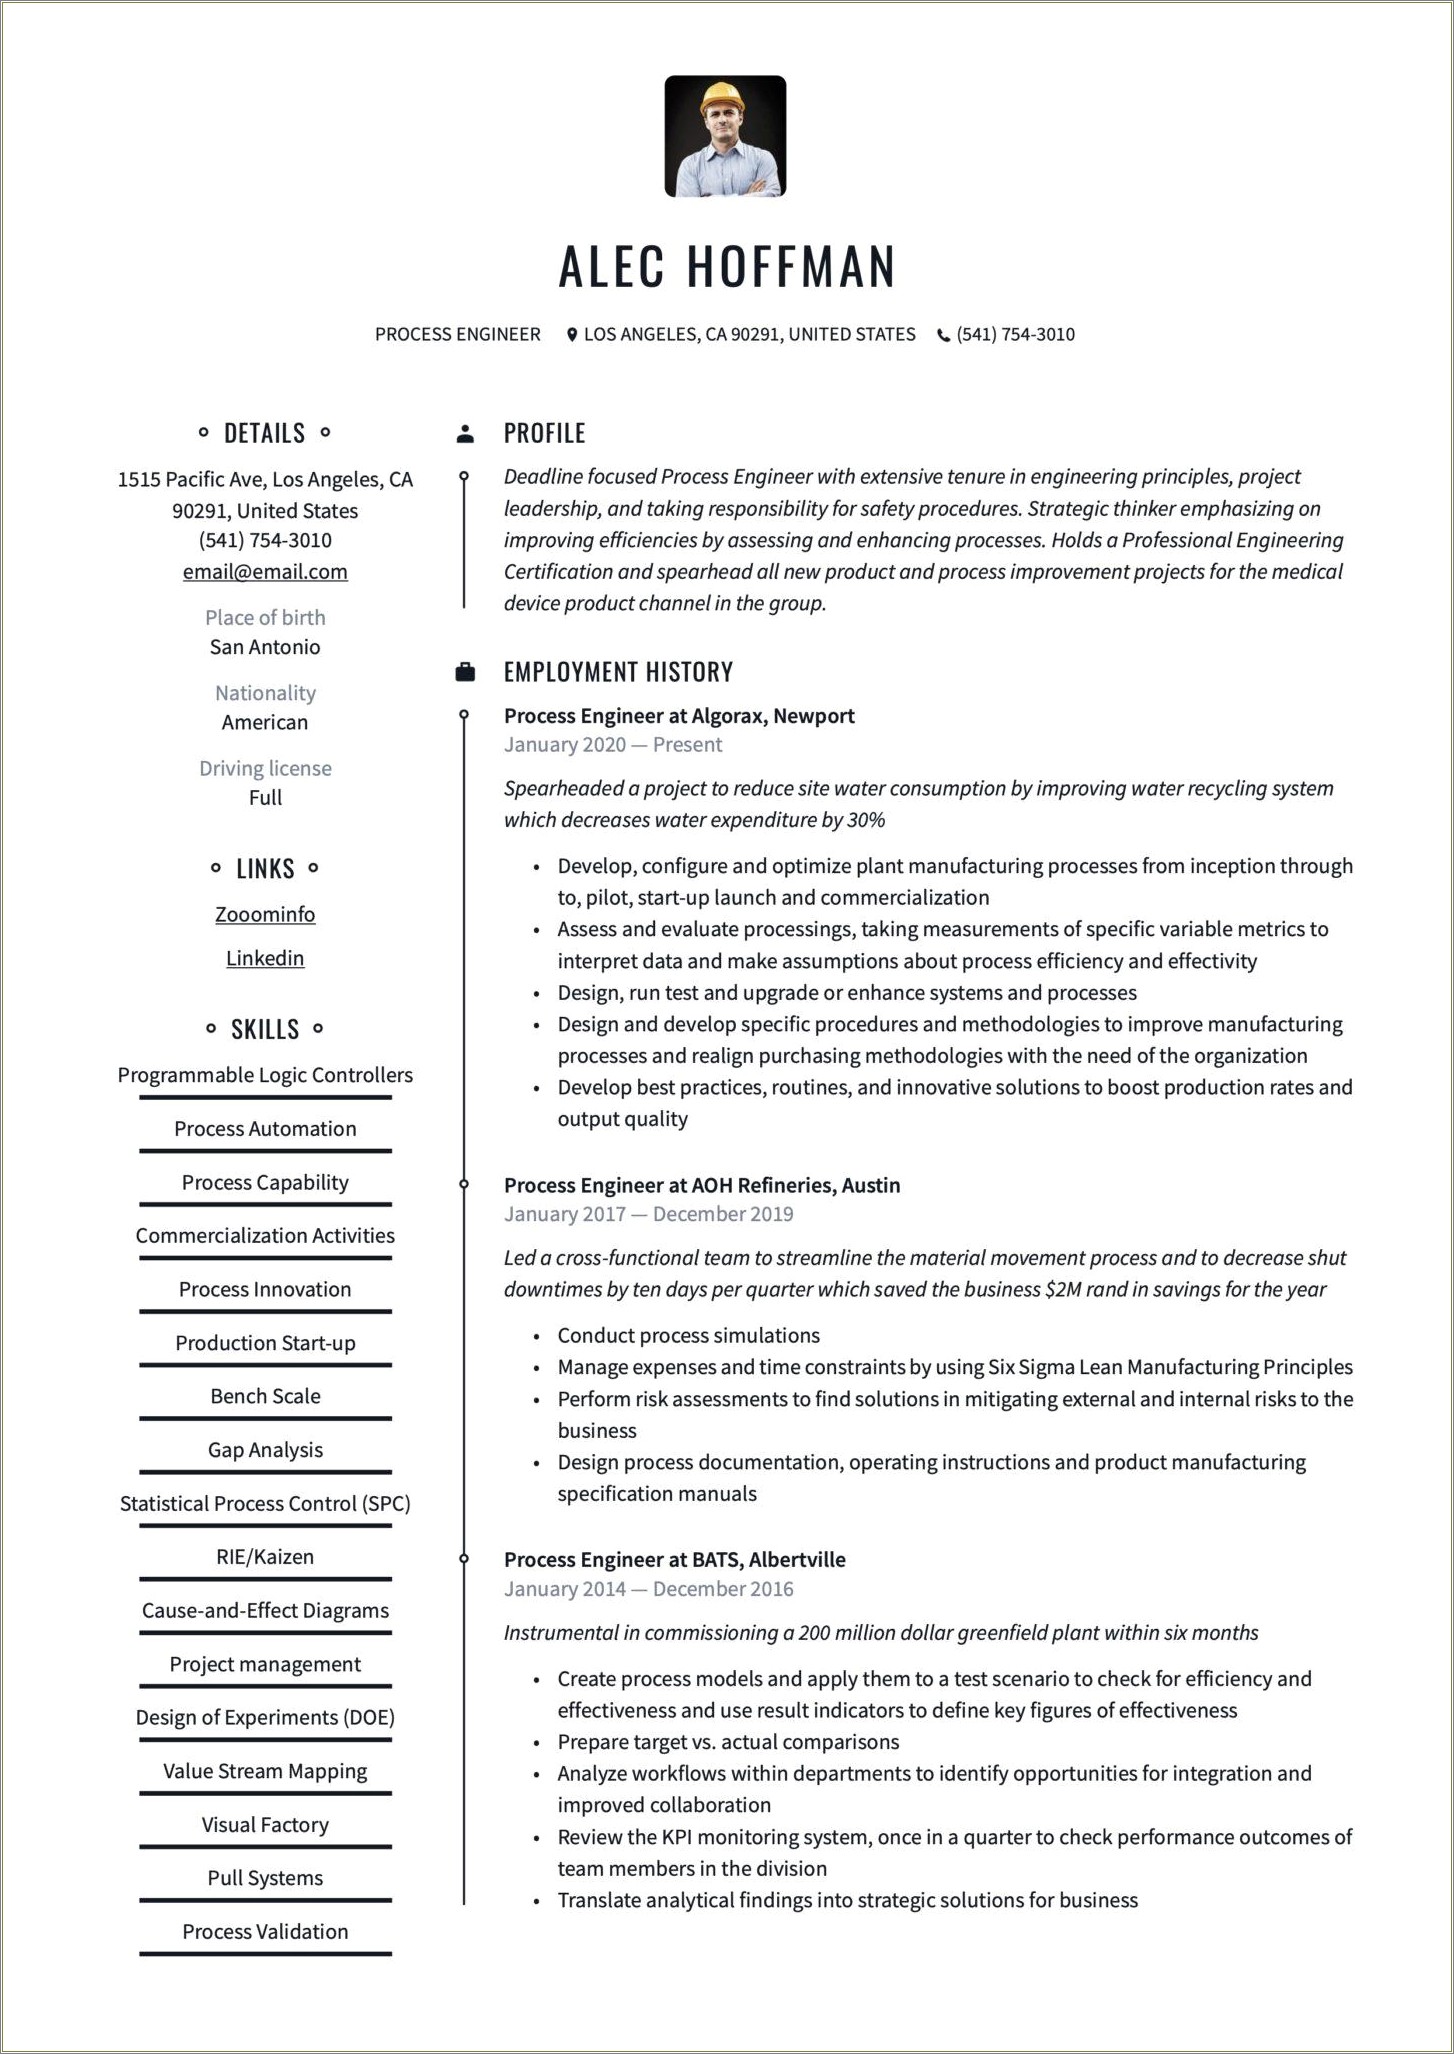 Medical Device Quality Engineer Resume Example